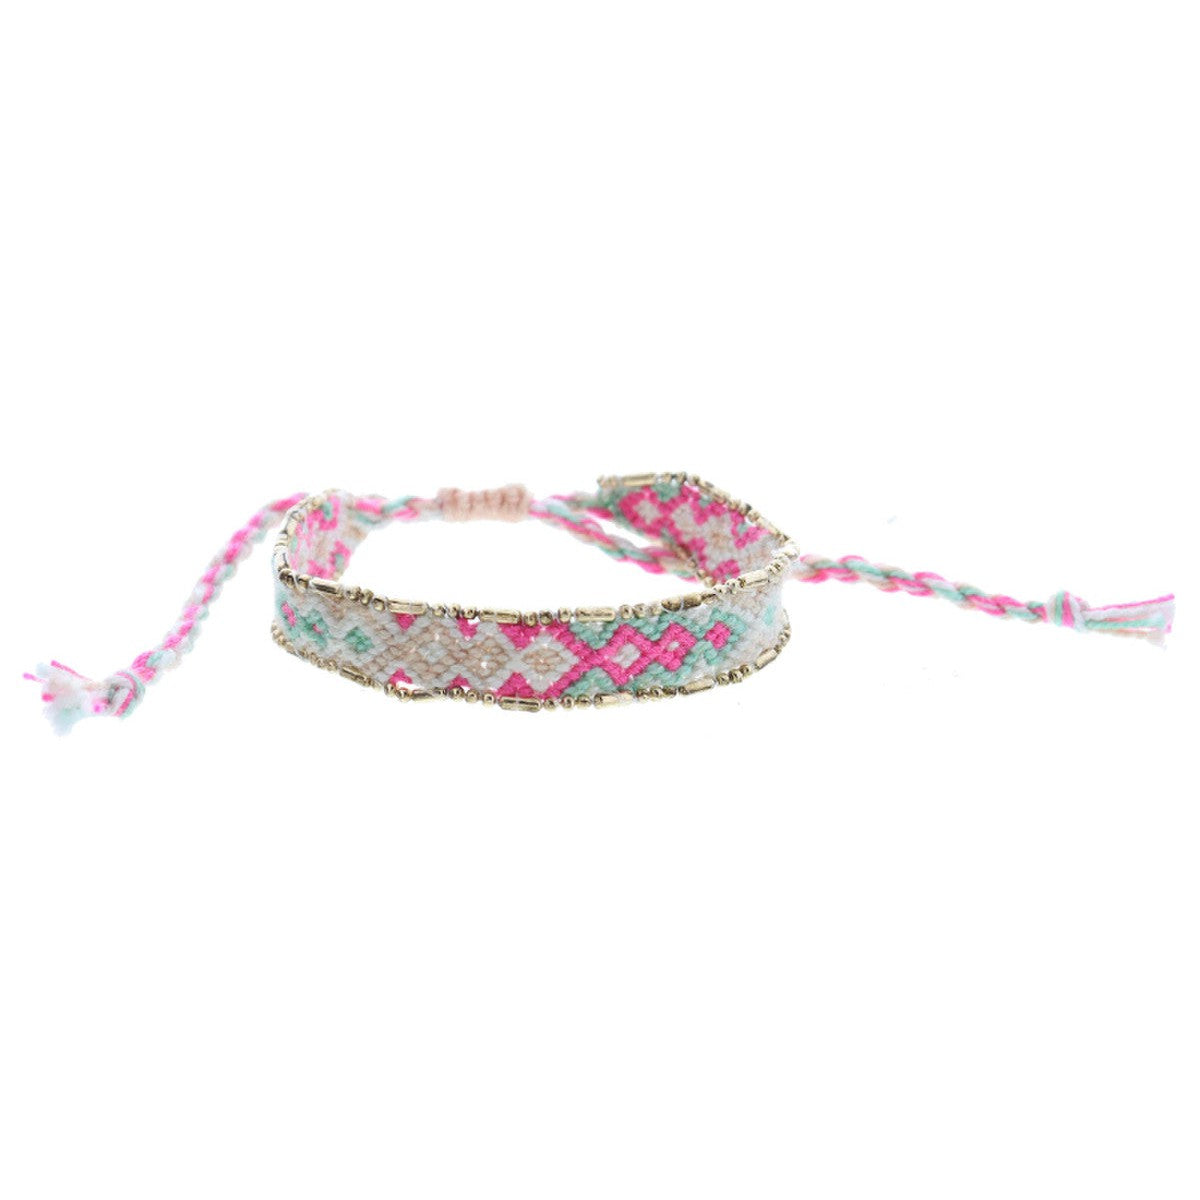 Jane Marie Kids Hot Pink, Mint, White, Peach Woven Band With Gold Accent Edge Bracelet-JANE MARIE-Little Giant Kidz